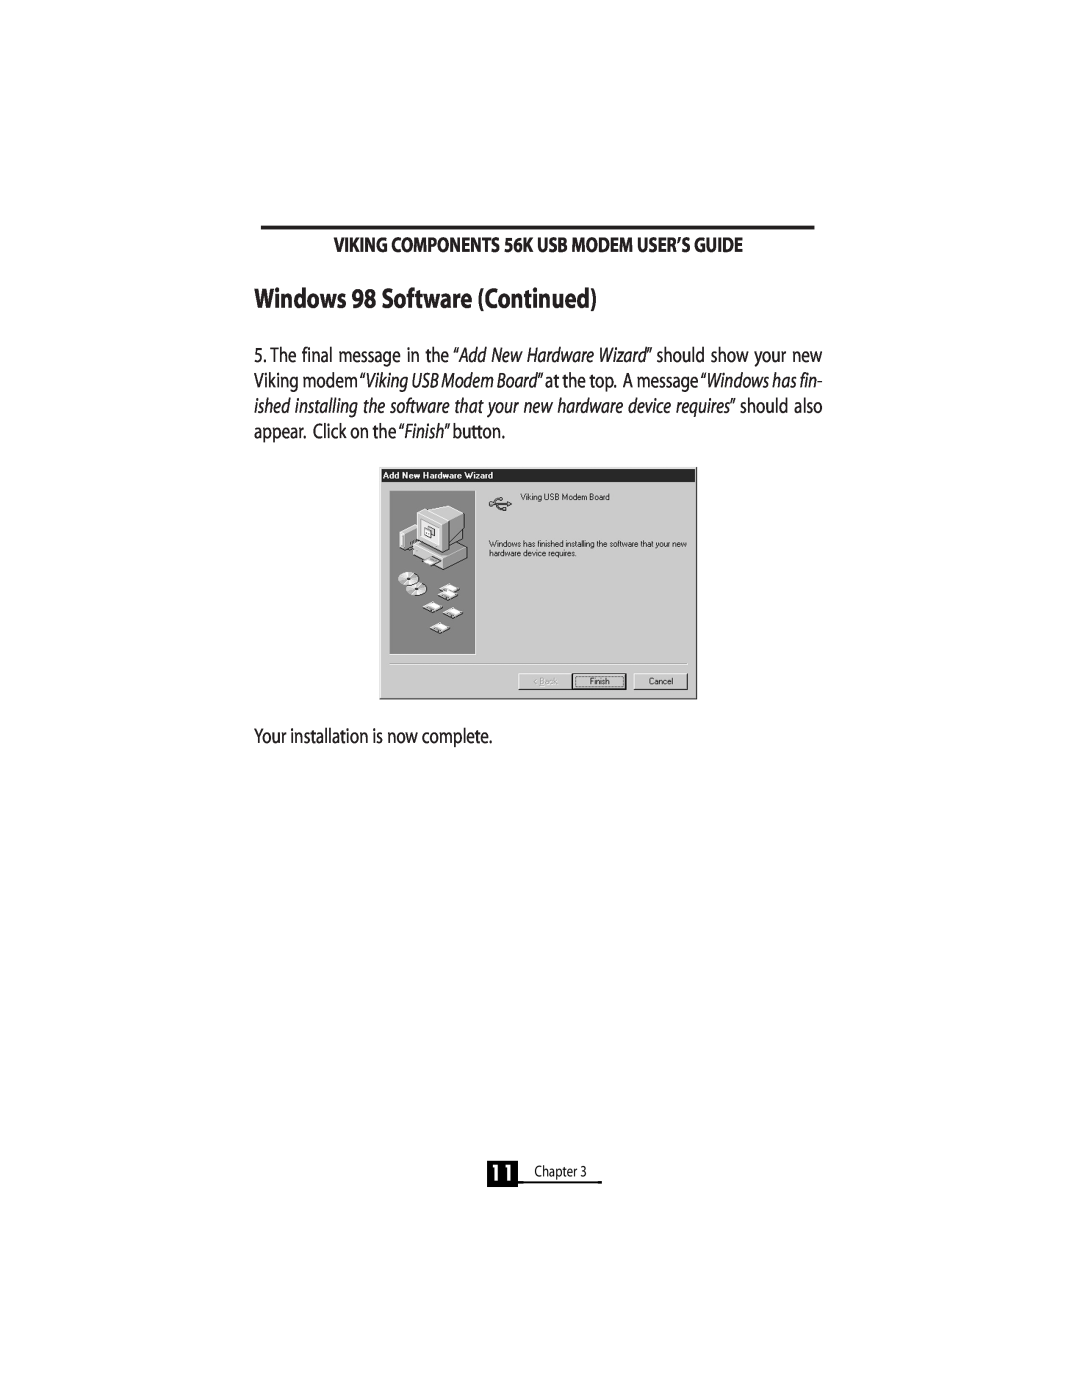 Viking InterWorks 56K manual Windows 98 Software Continued, Chapter 